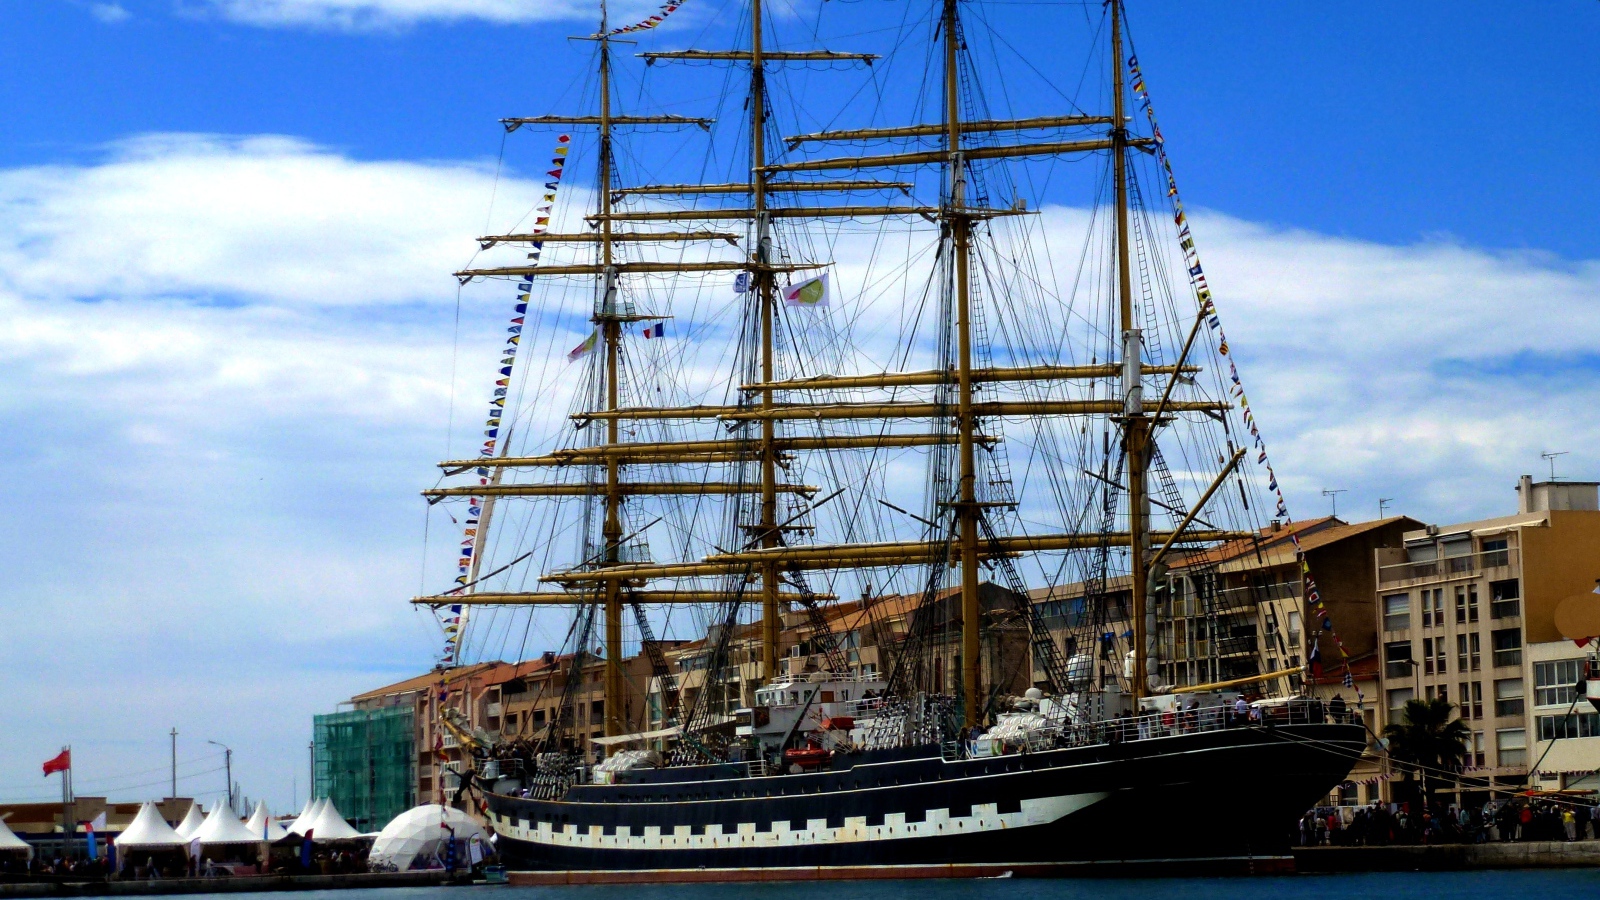 Large sailing frigate in the port against the sky